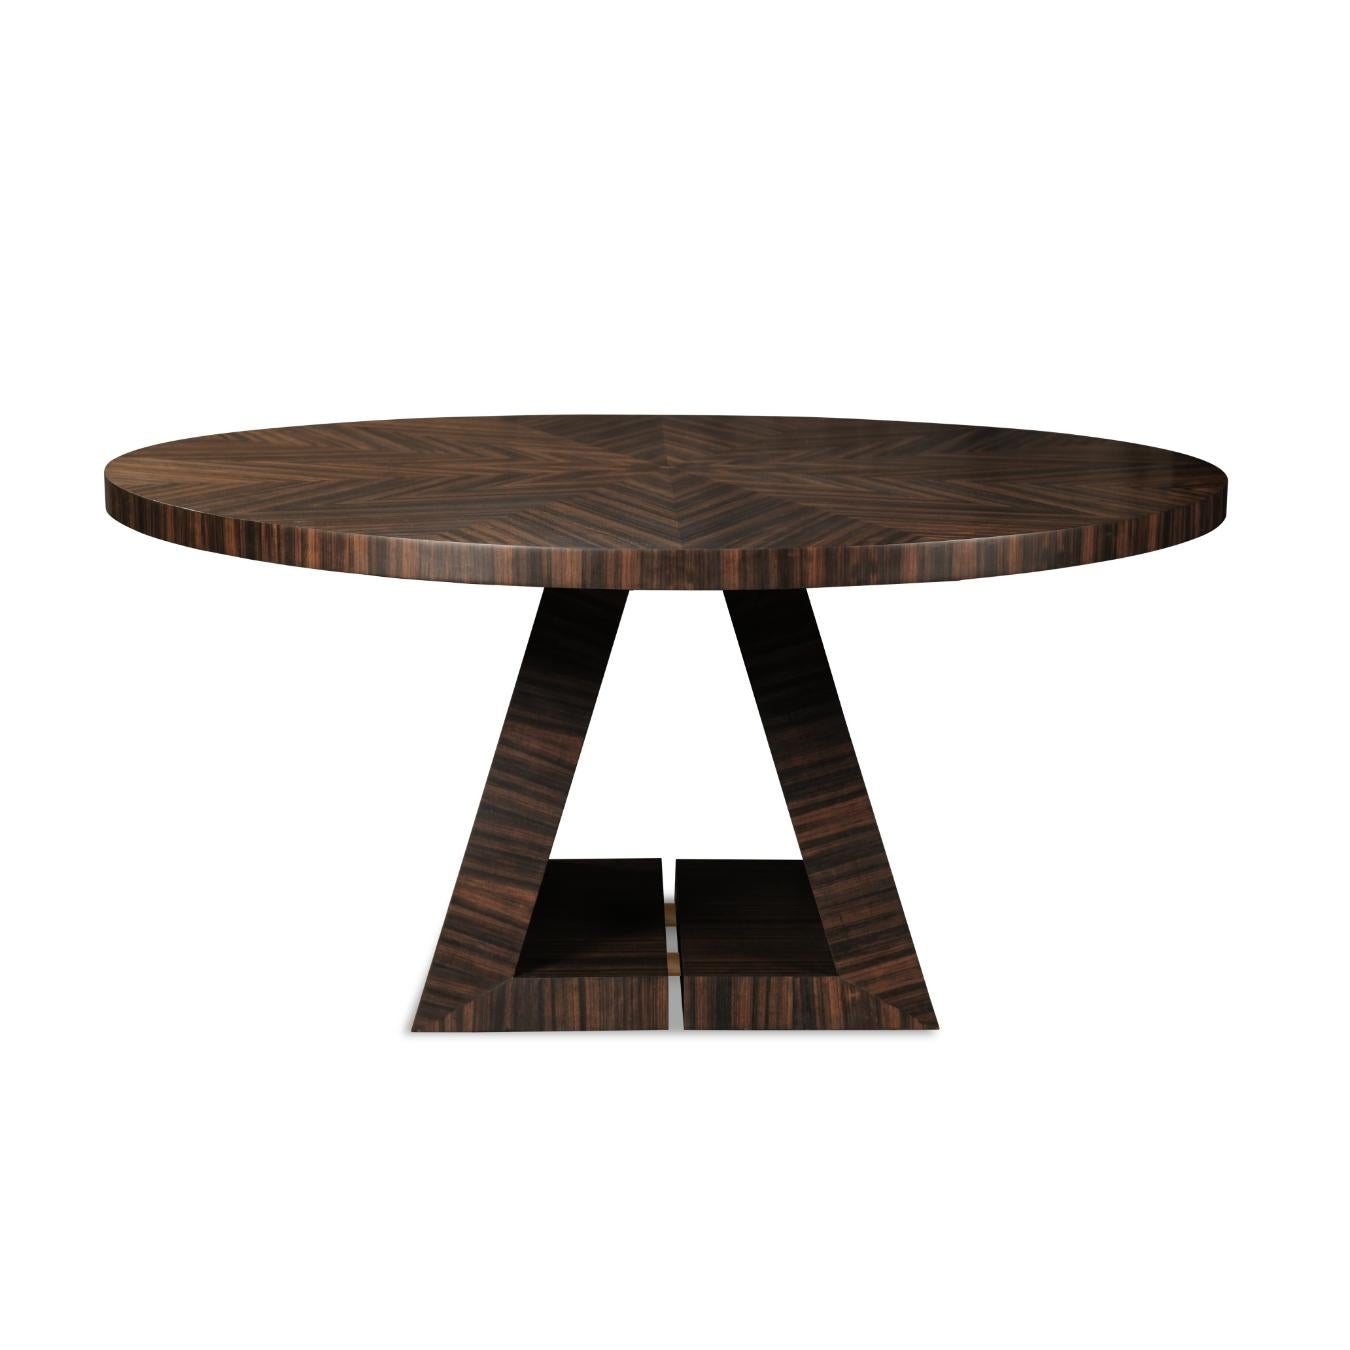 Mexican Wood Round Rochelle Dining Table with Ebony Veneer Wax Finish and Brass Details For Sale